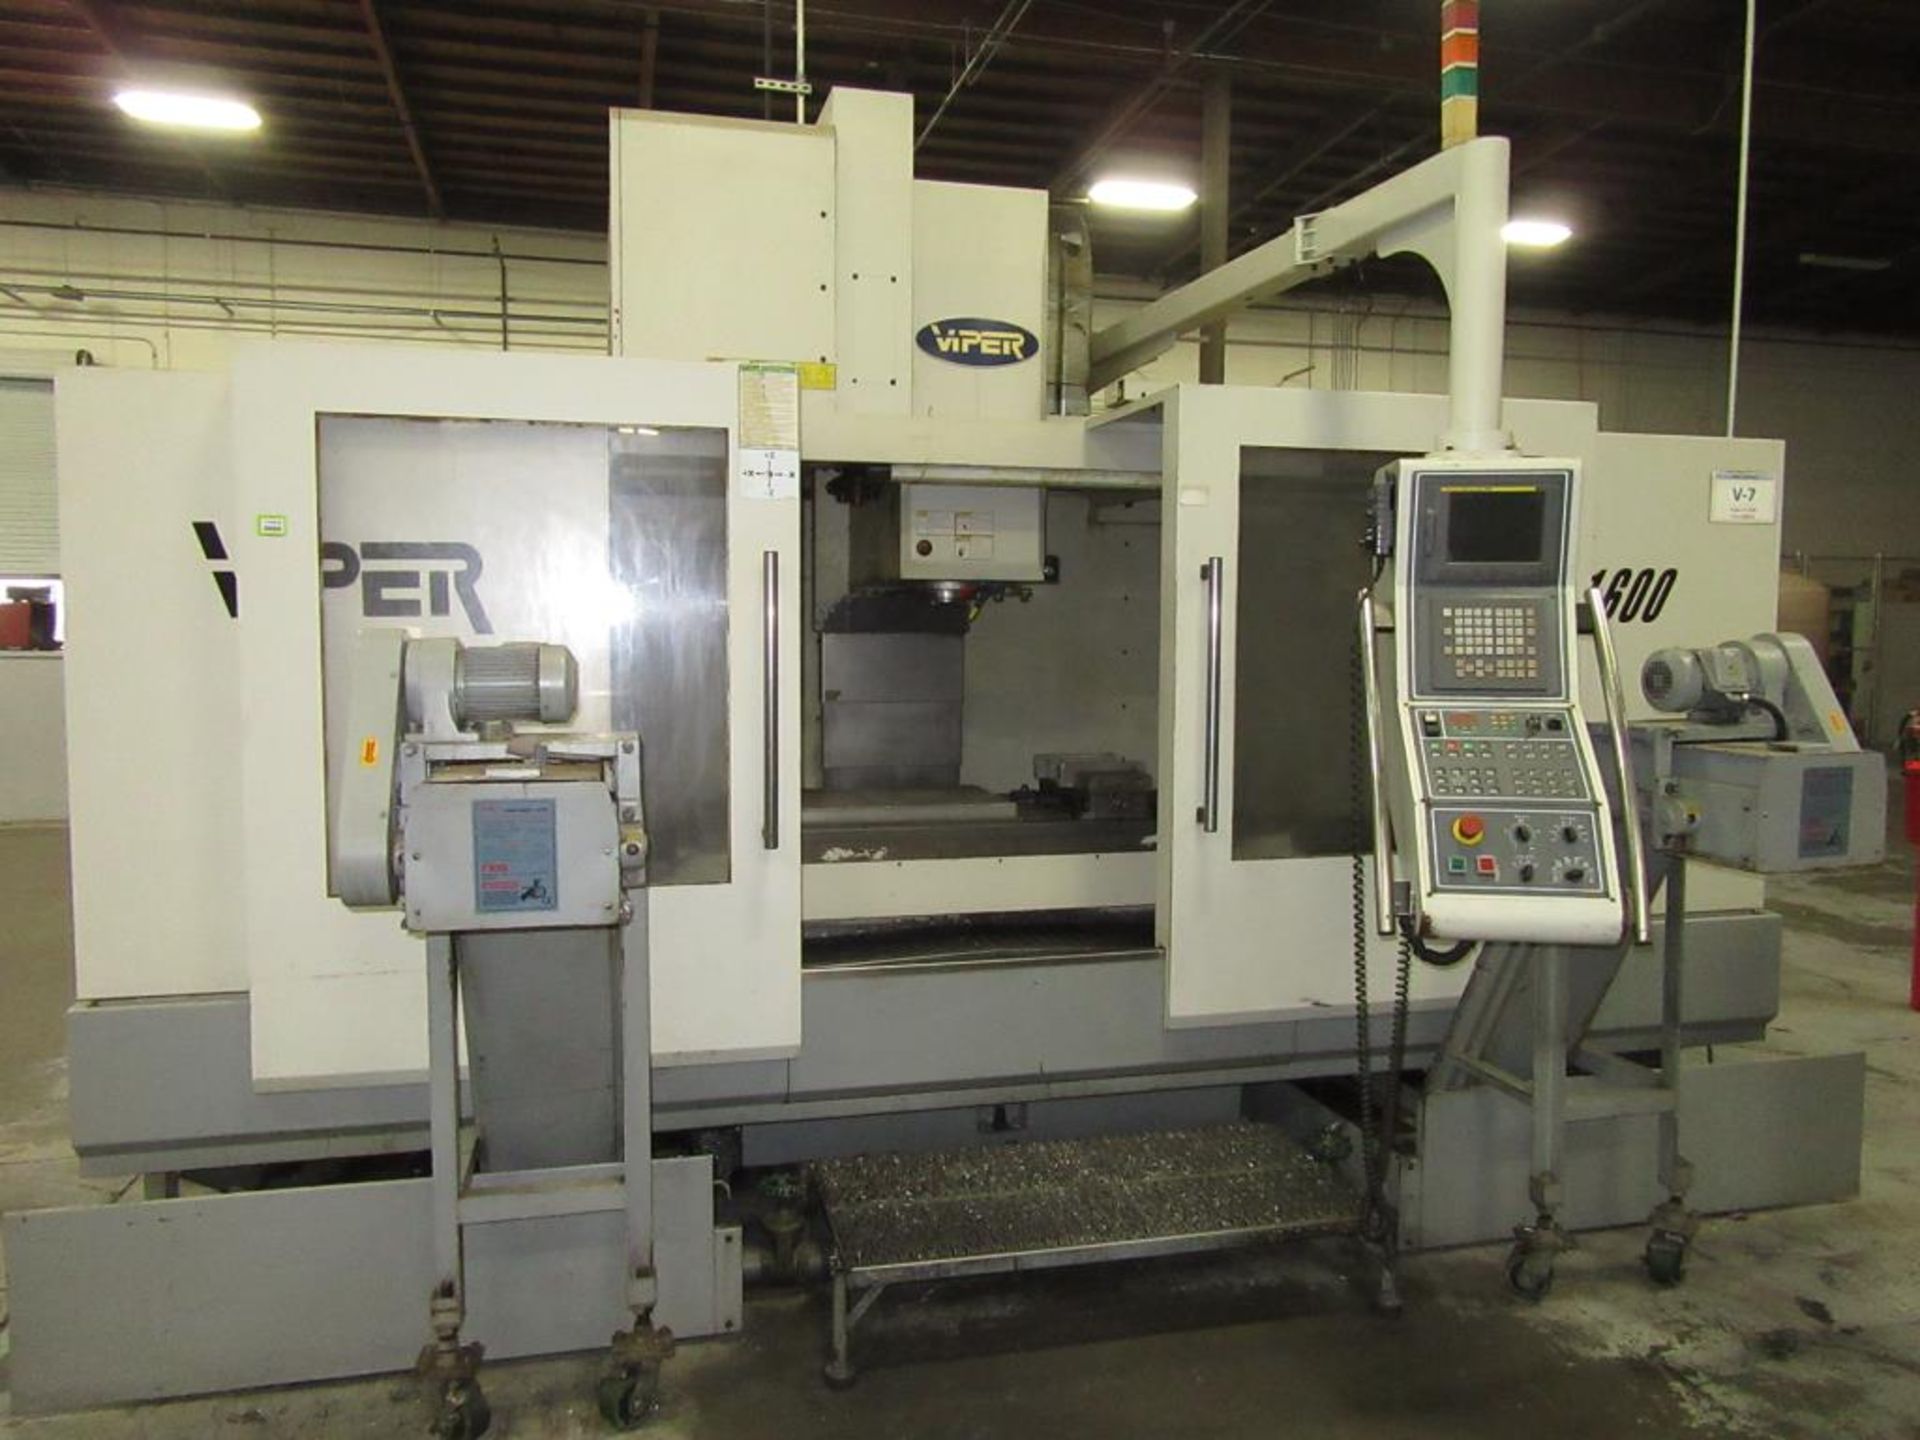 Mighty Viper VMC-1600A. 2006 - CNC Vertical Machining Center with Fanuc 21i-MB 3-Axis Control Panel,